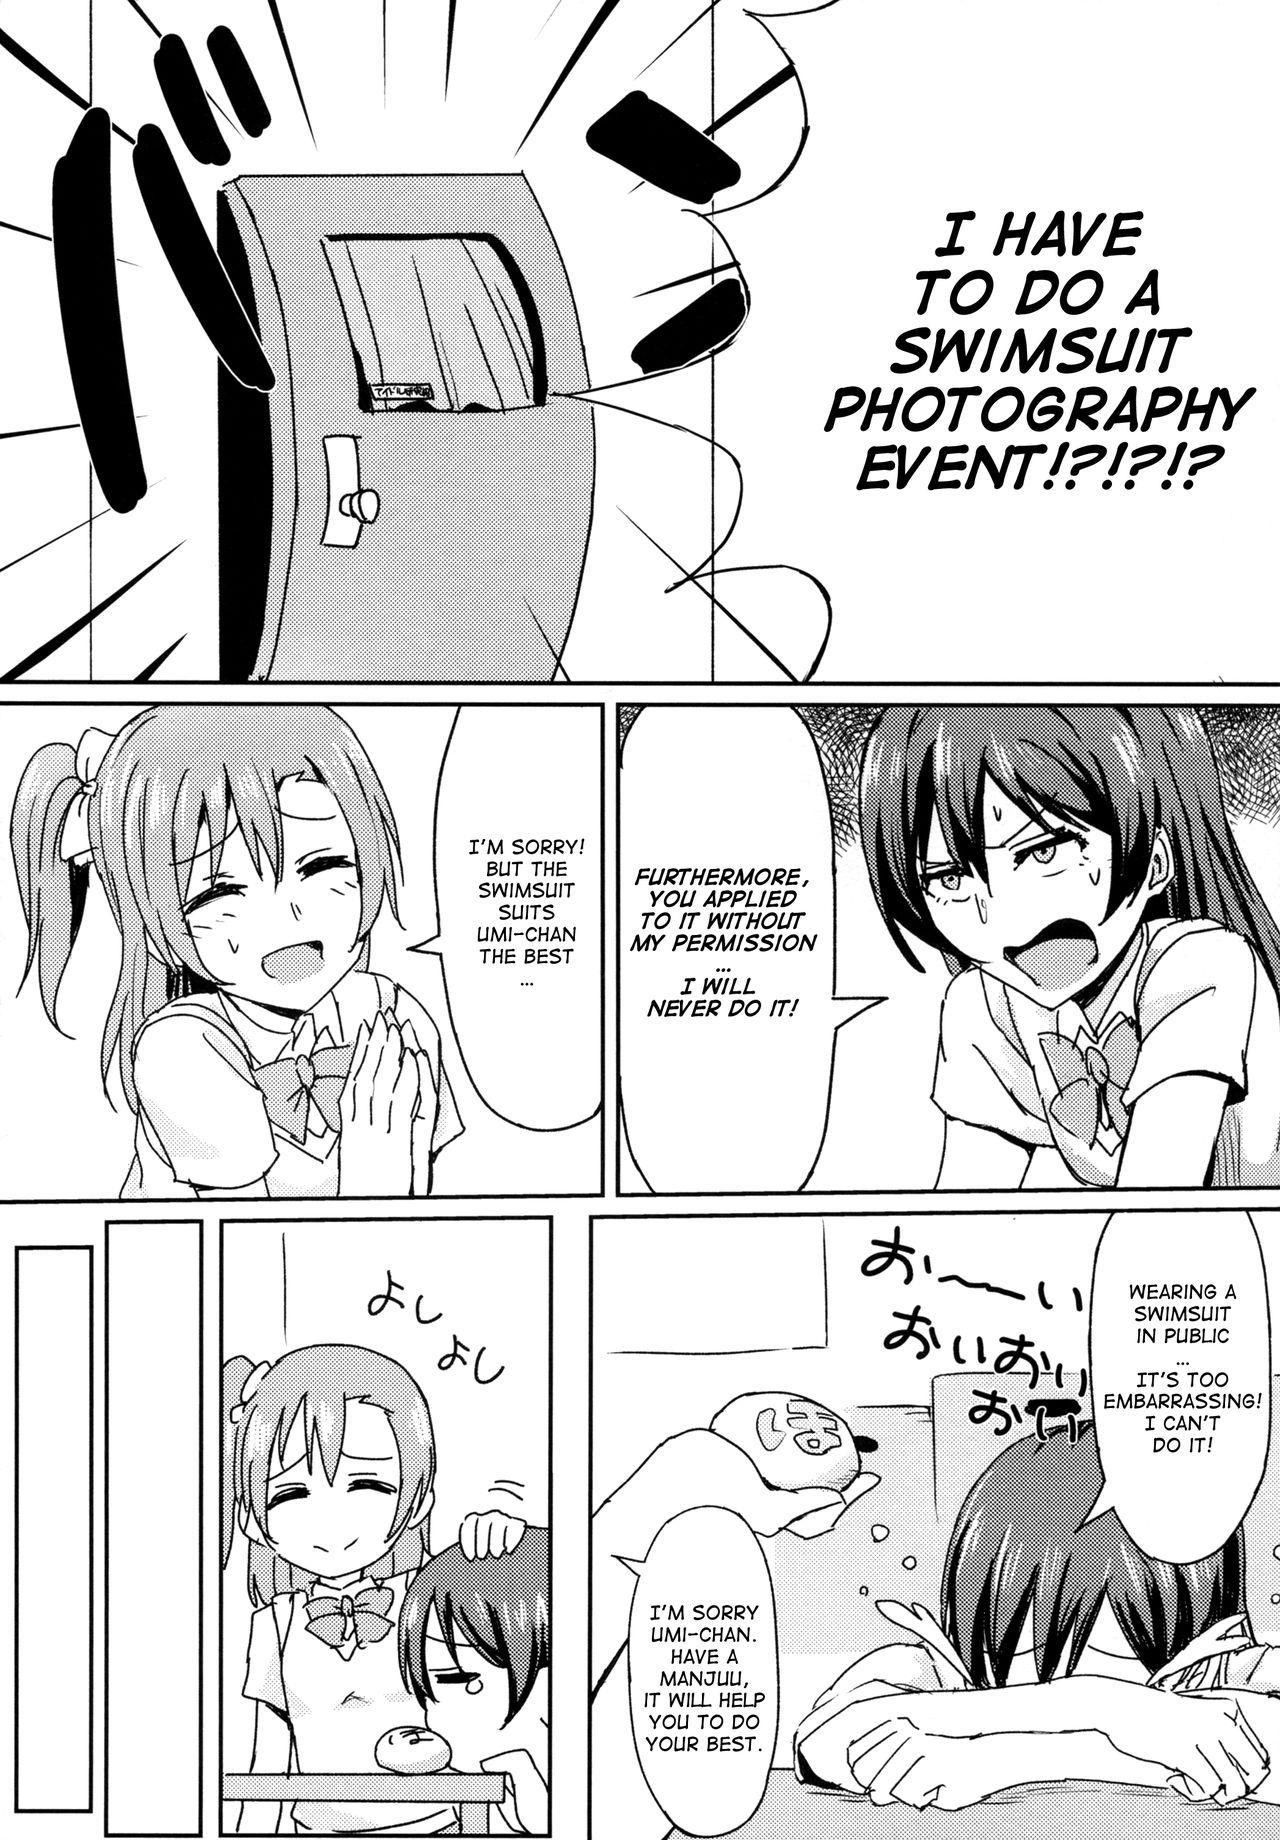 Hymen Hah,Wrench This! - Love live Camera - Page 5